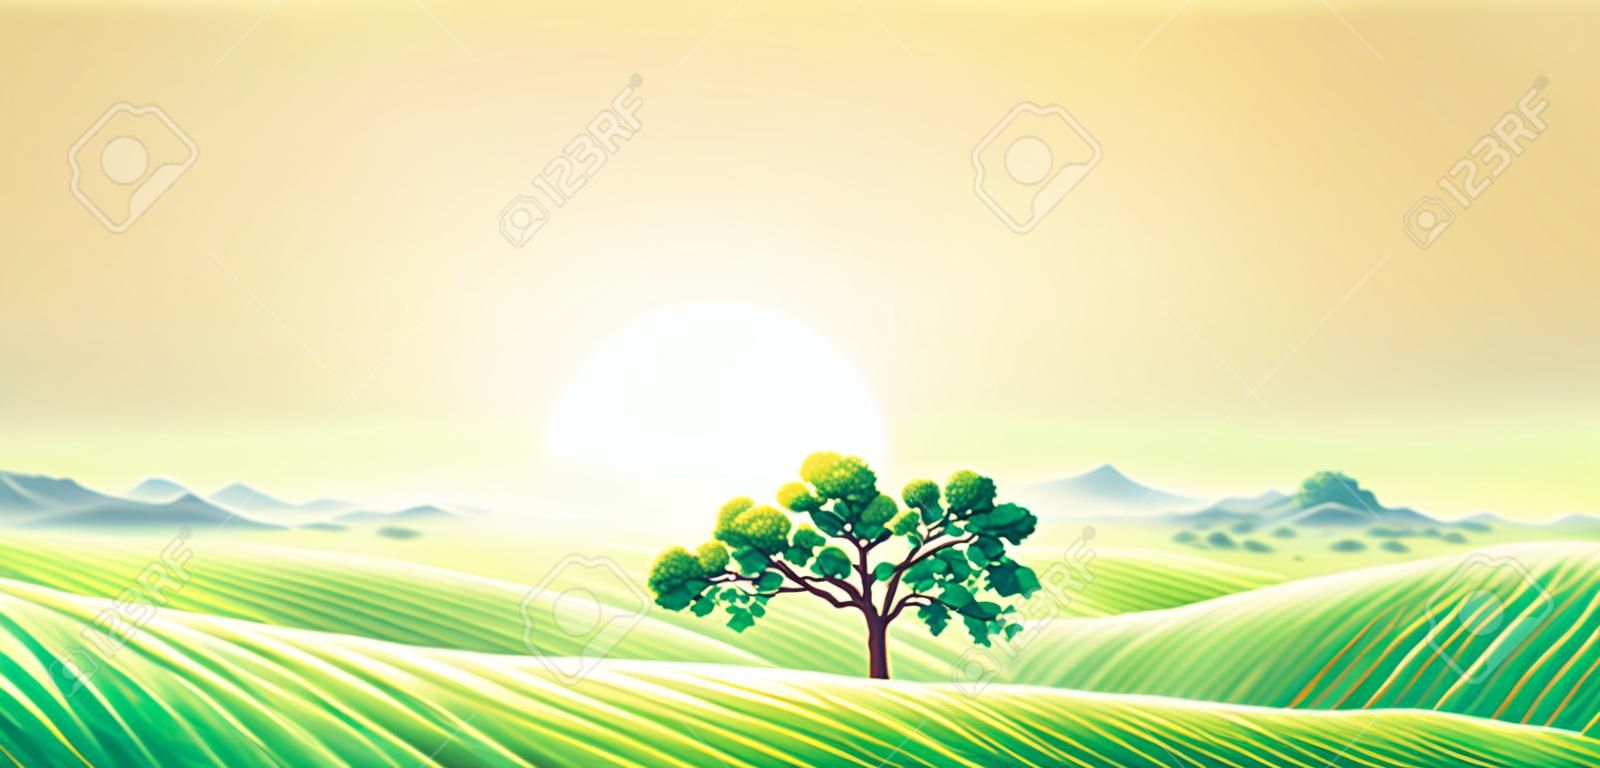 Rural dawn landscape with fields and mountains. Raster illustration.